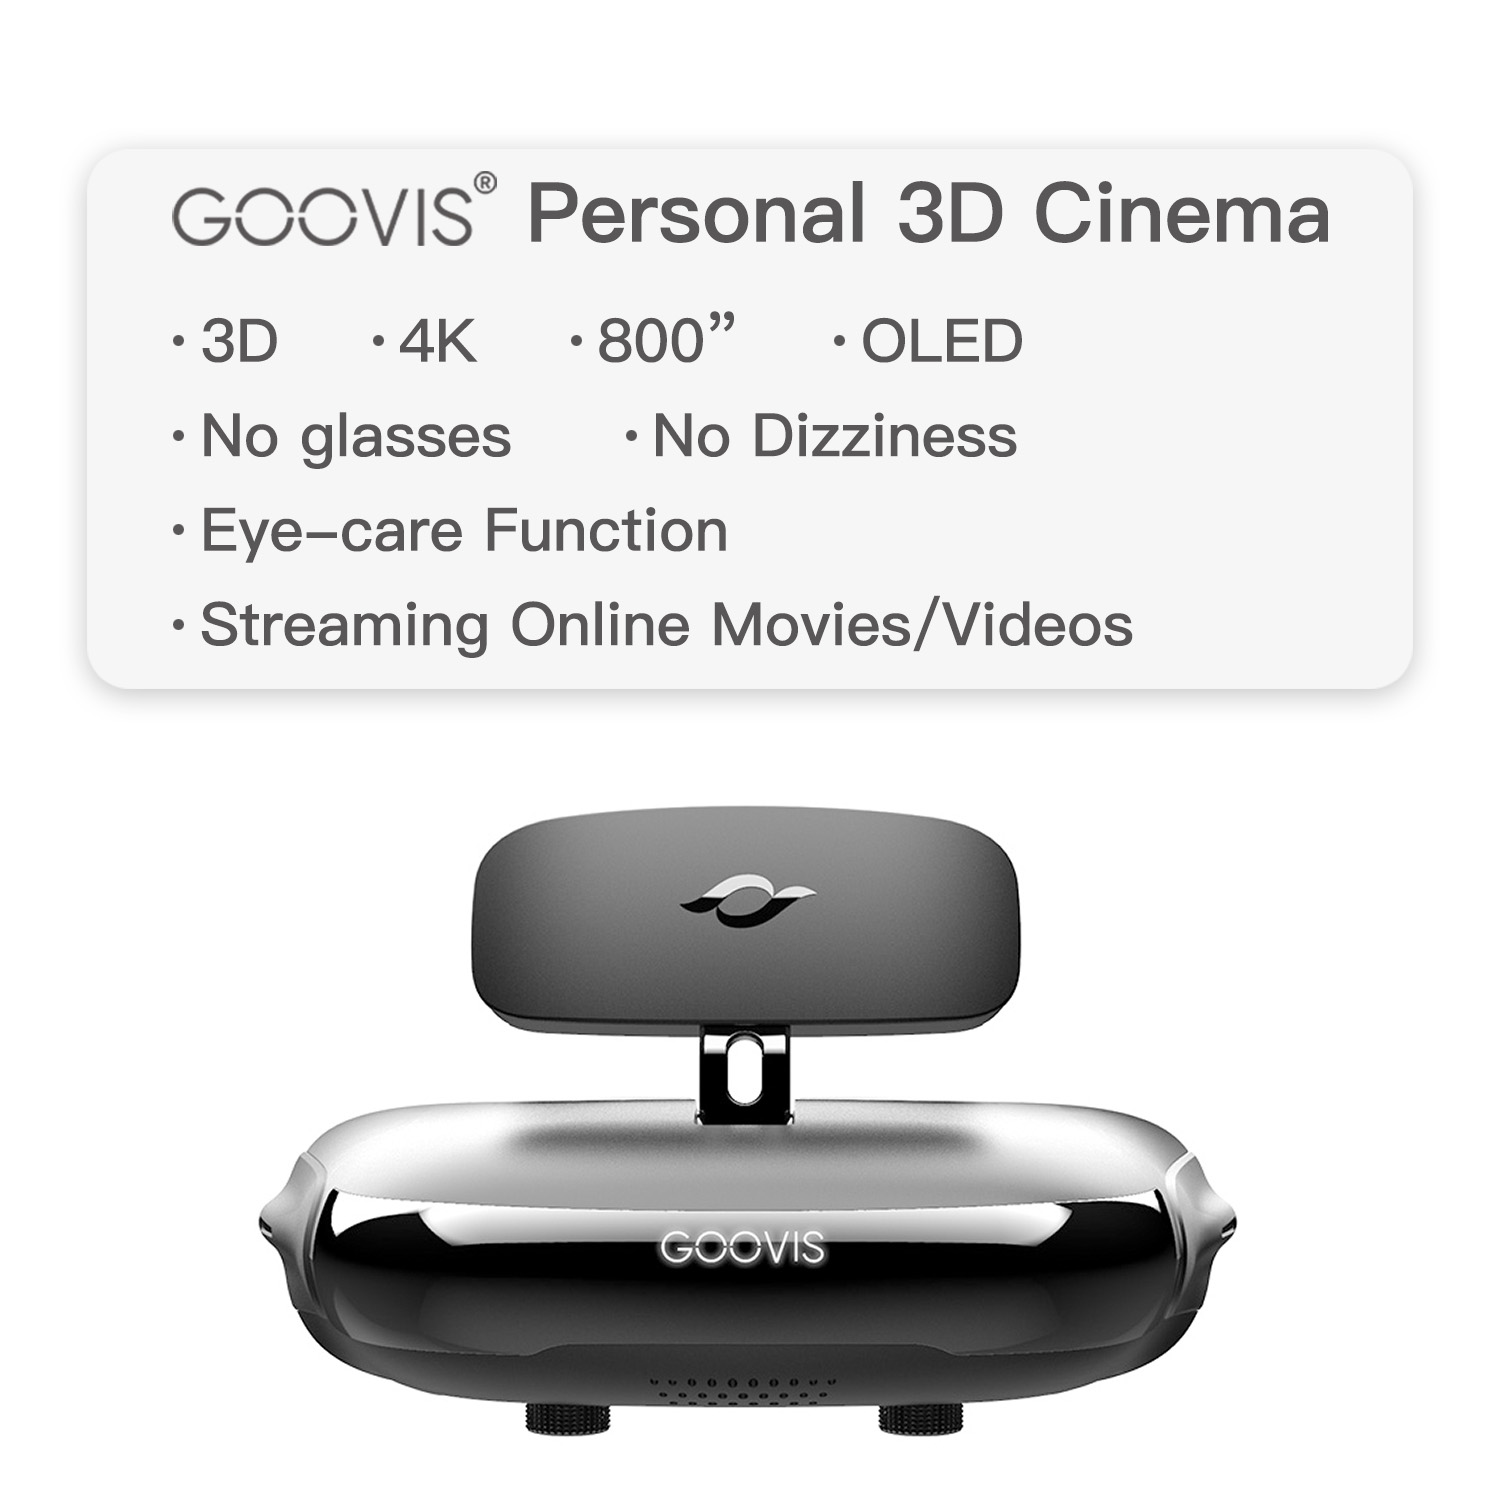  GOOVIS Pro AMOLED Display, Blu-Ray 2D / 3D Glasses HMD Support  4K Blue-ray 3D Movies,Netflix Prime Video Hulu Apple TV+  Video  Movies Compatible with PS5 and Gaming Consoles HDMI connectable 